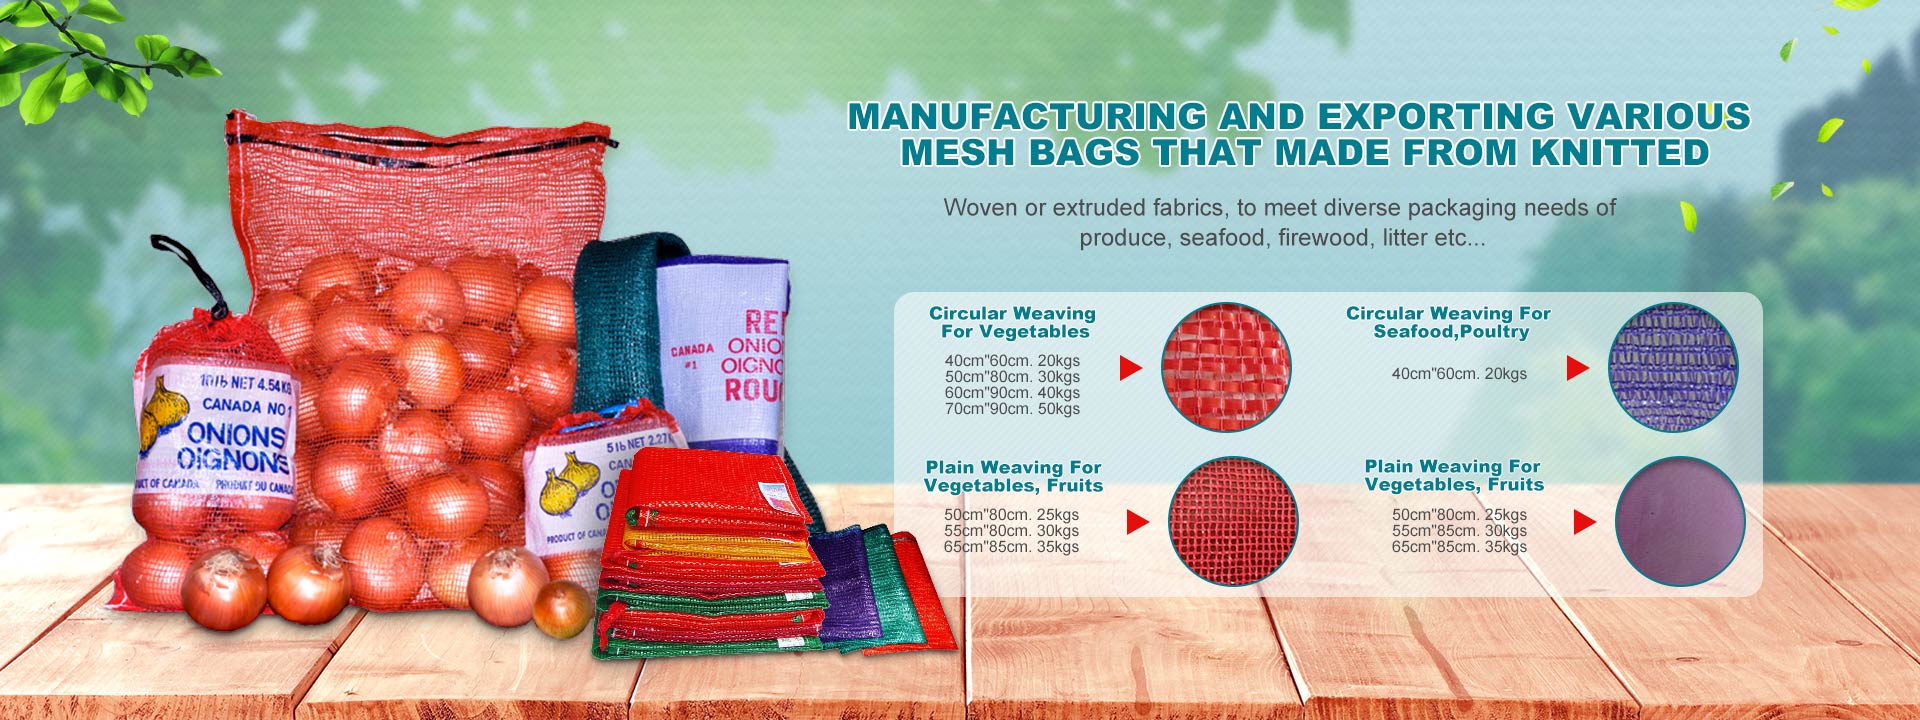 Manufacturing and exporting various mesh bags that made from knitted